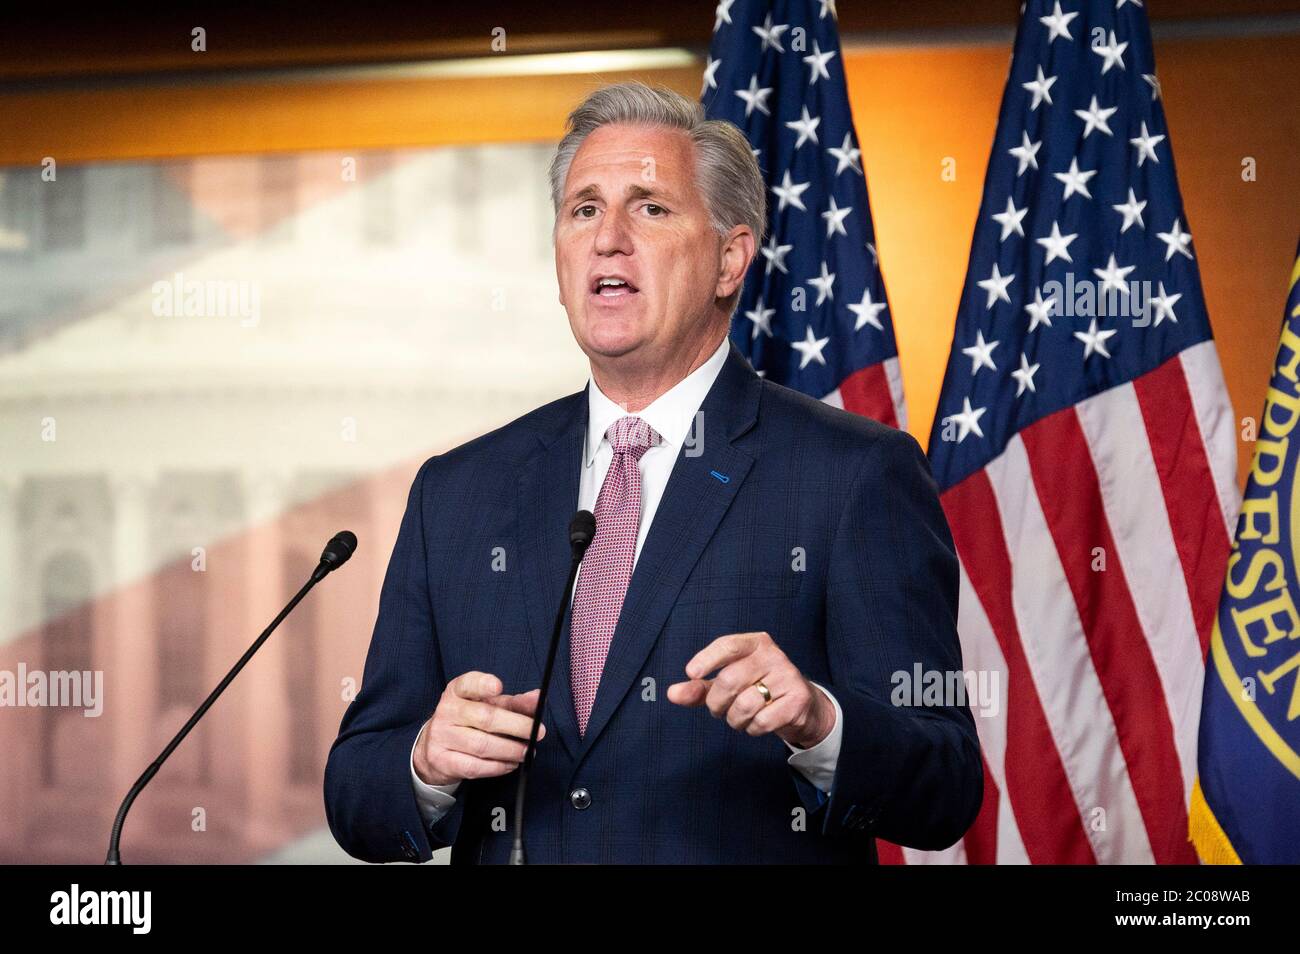 Washington, DC, USA. 11th June, 2020. June 11, 2020 - Washington, DC, United States: House Minority Leader KEVIN MCCARTHY (R-CA) at his weekly press conference. Credit: Michael Brochstein/ZUMA Wire/Alamy Live News Stock Photo